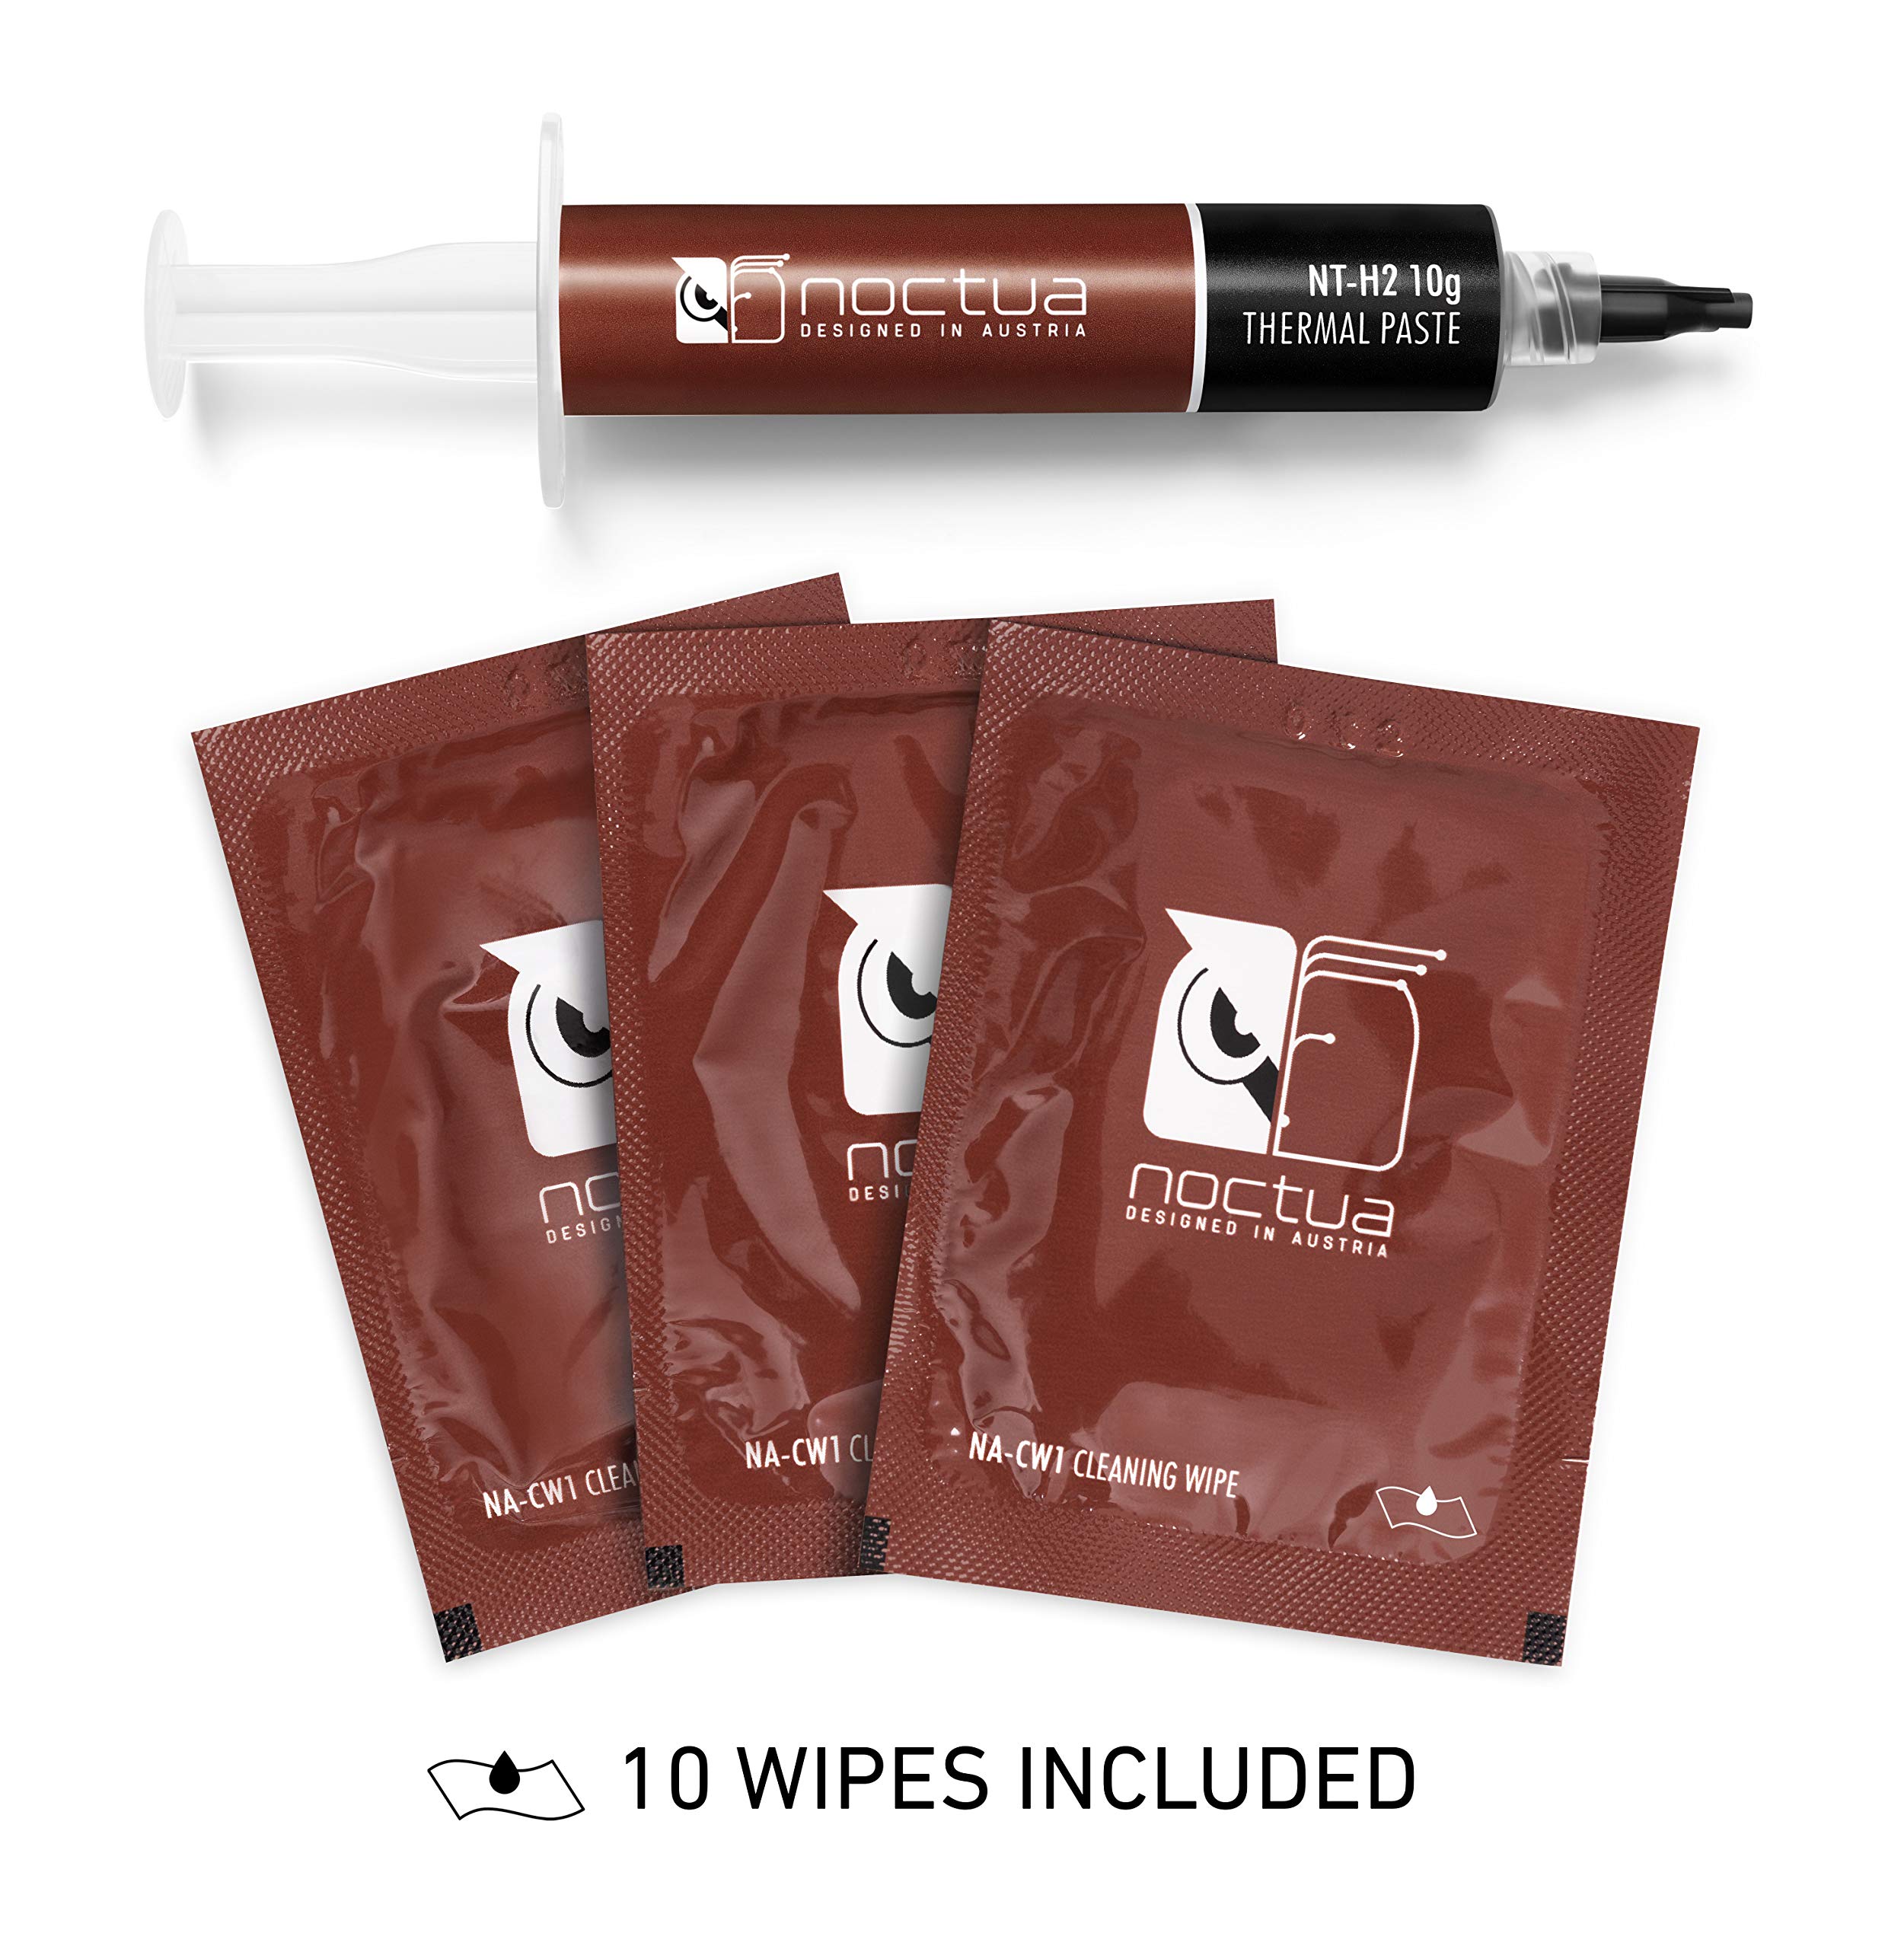 Noctua NT-H2 10g, Thermal Computer Paste incl. 10 Cleaning Wipes (10g)